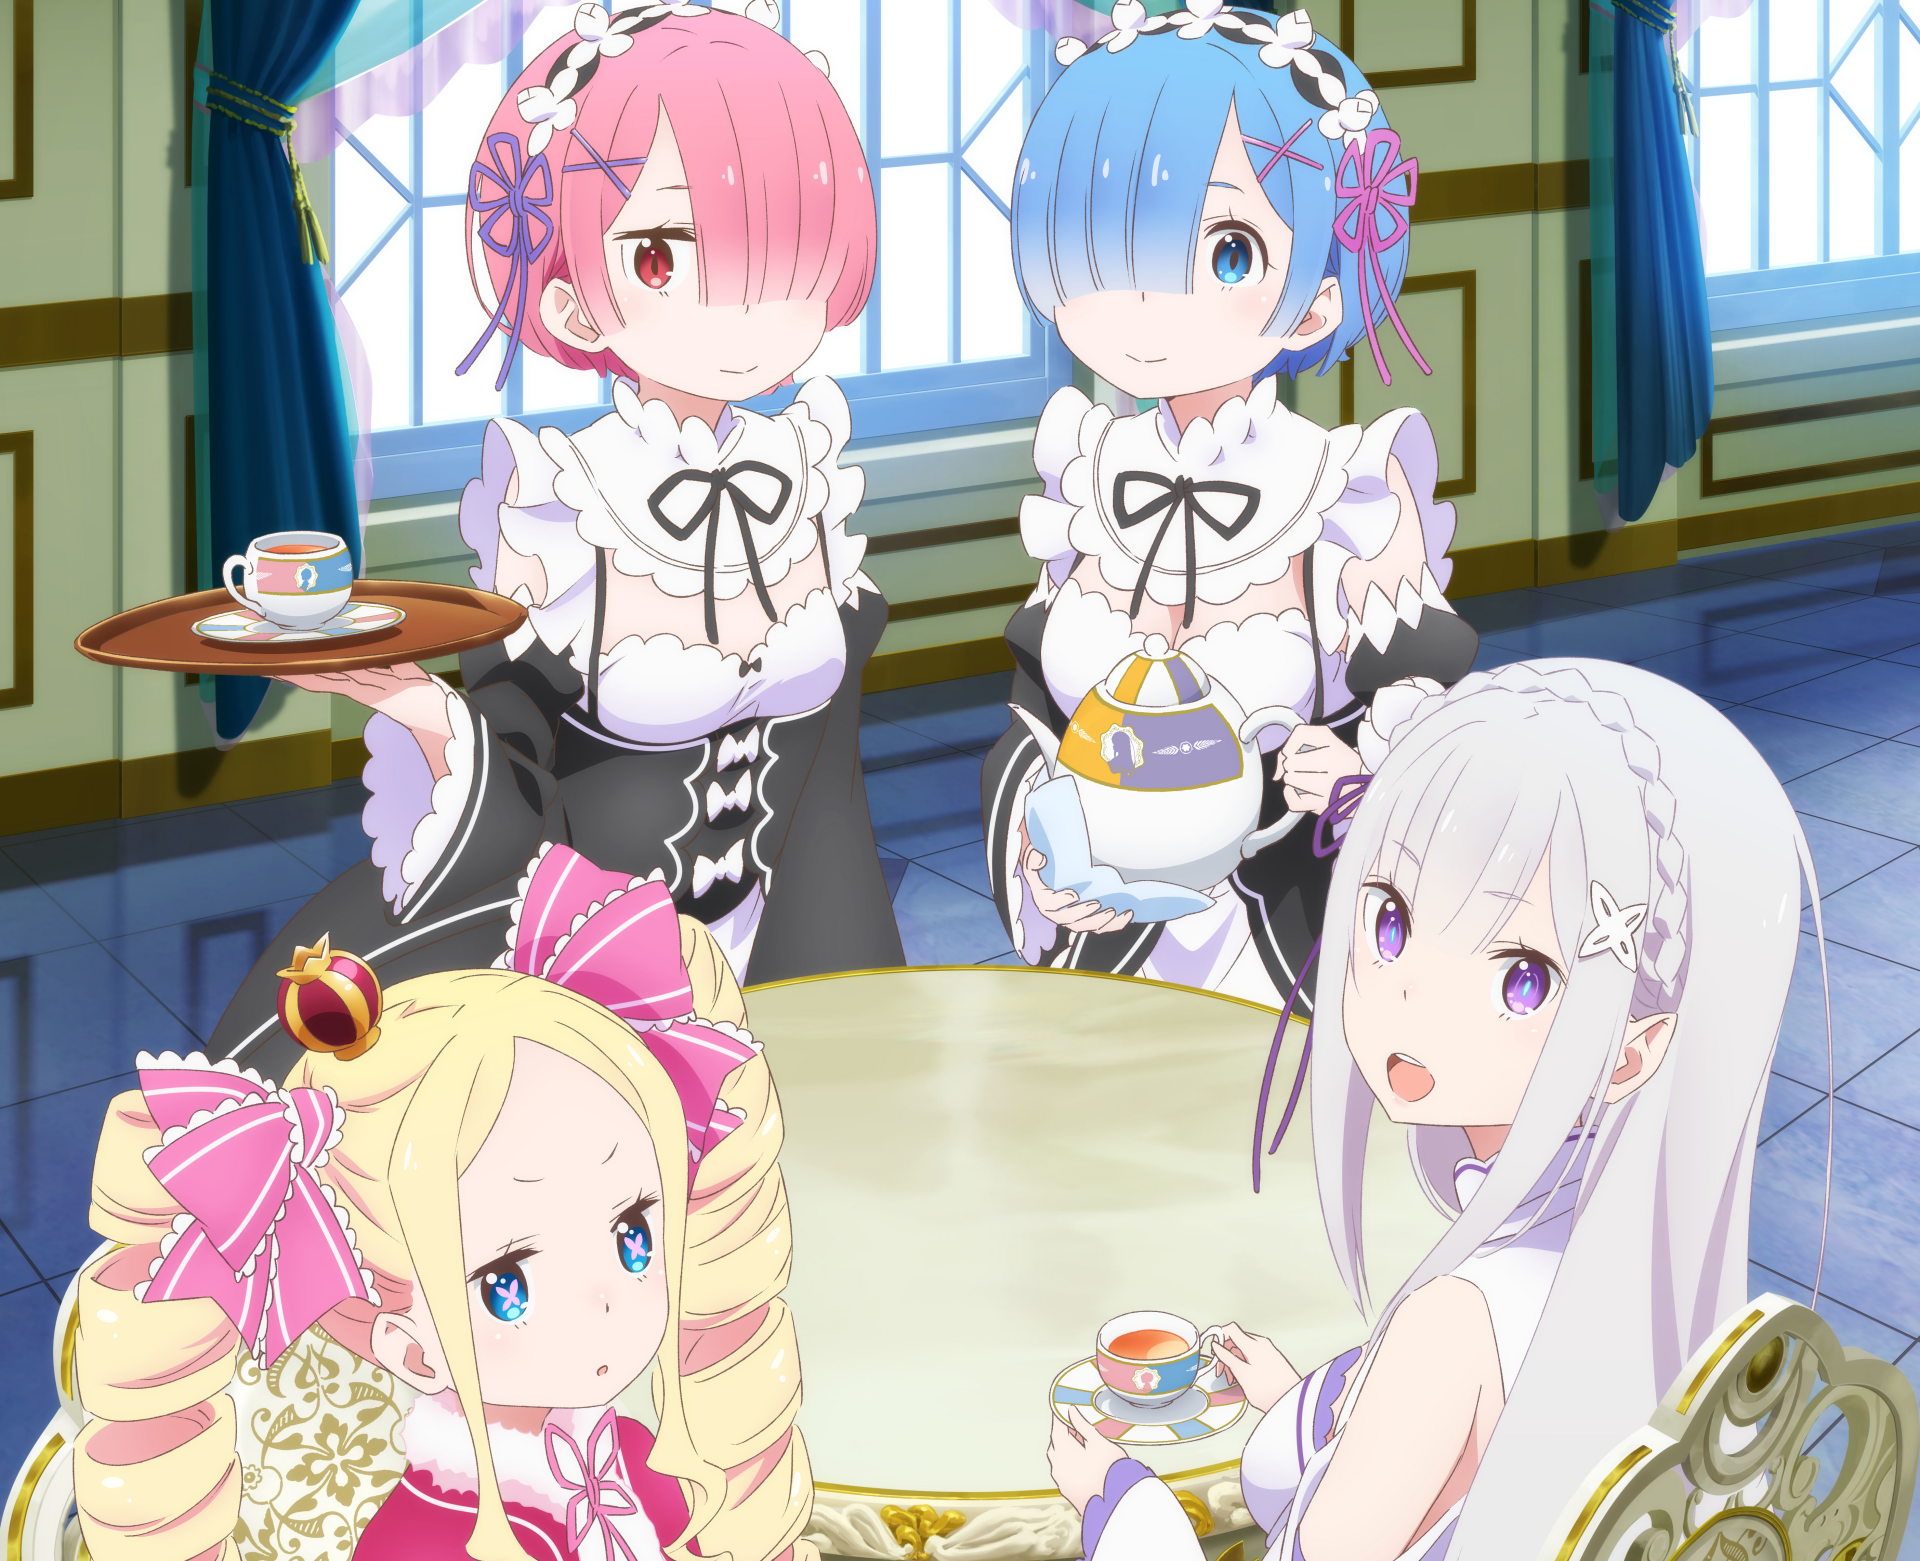 Re:Zero Starting Life in Another World Wall Scroll Emilia, Rem & Ram